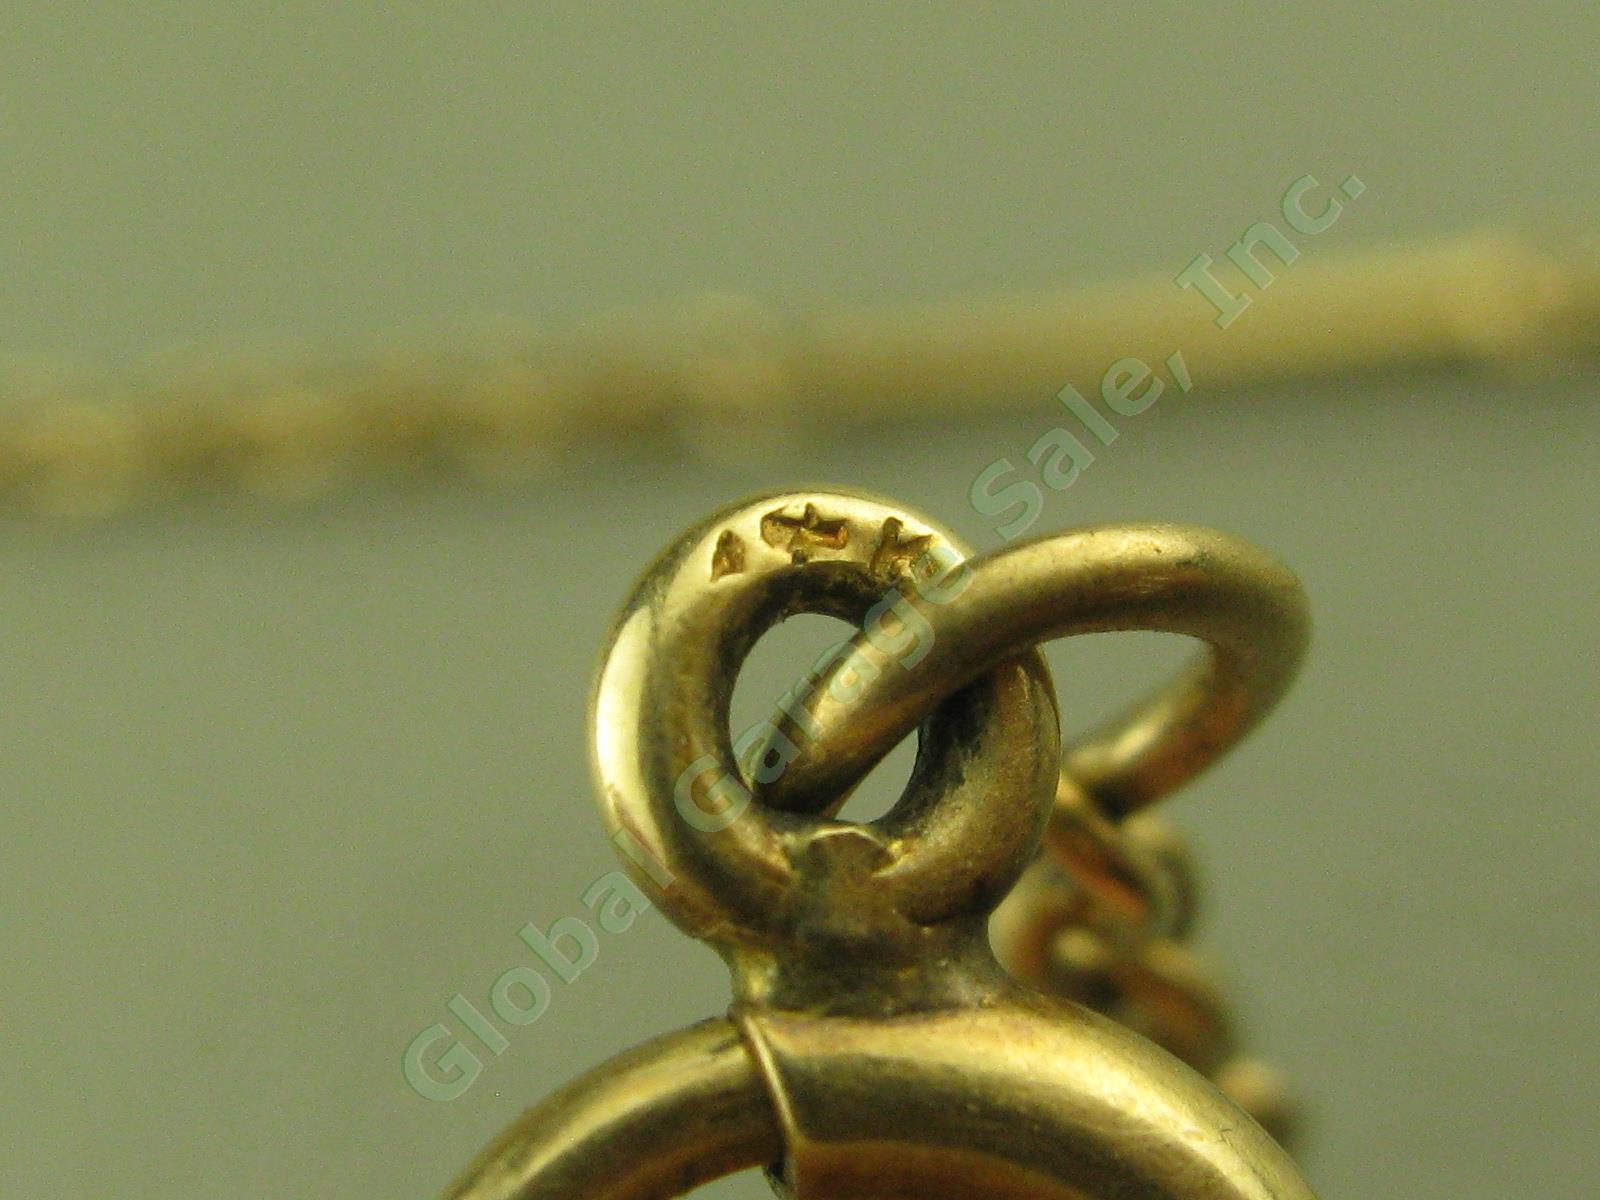 Vtg Antique 14k Yellow Gold Pocket Watch Chain W/ Clasp Spring Ring 5.6 Grams NR 4